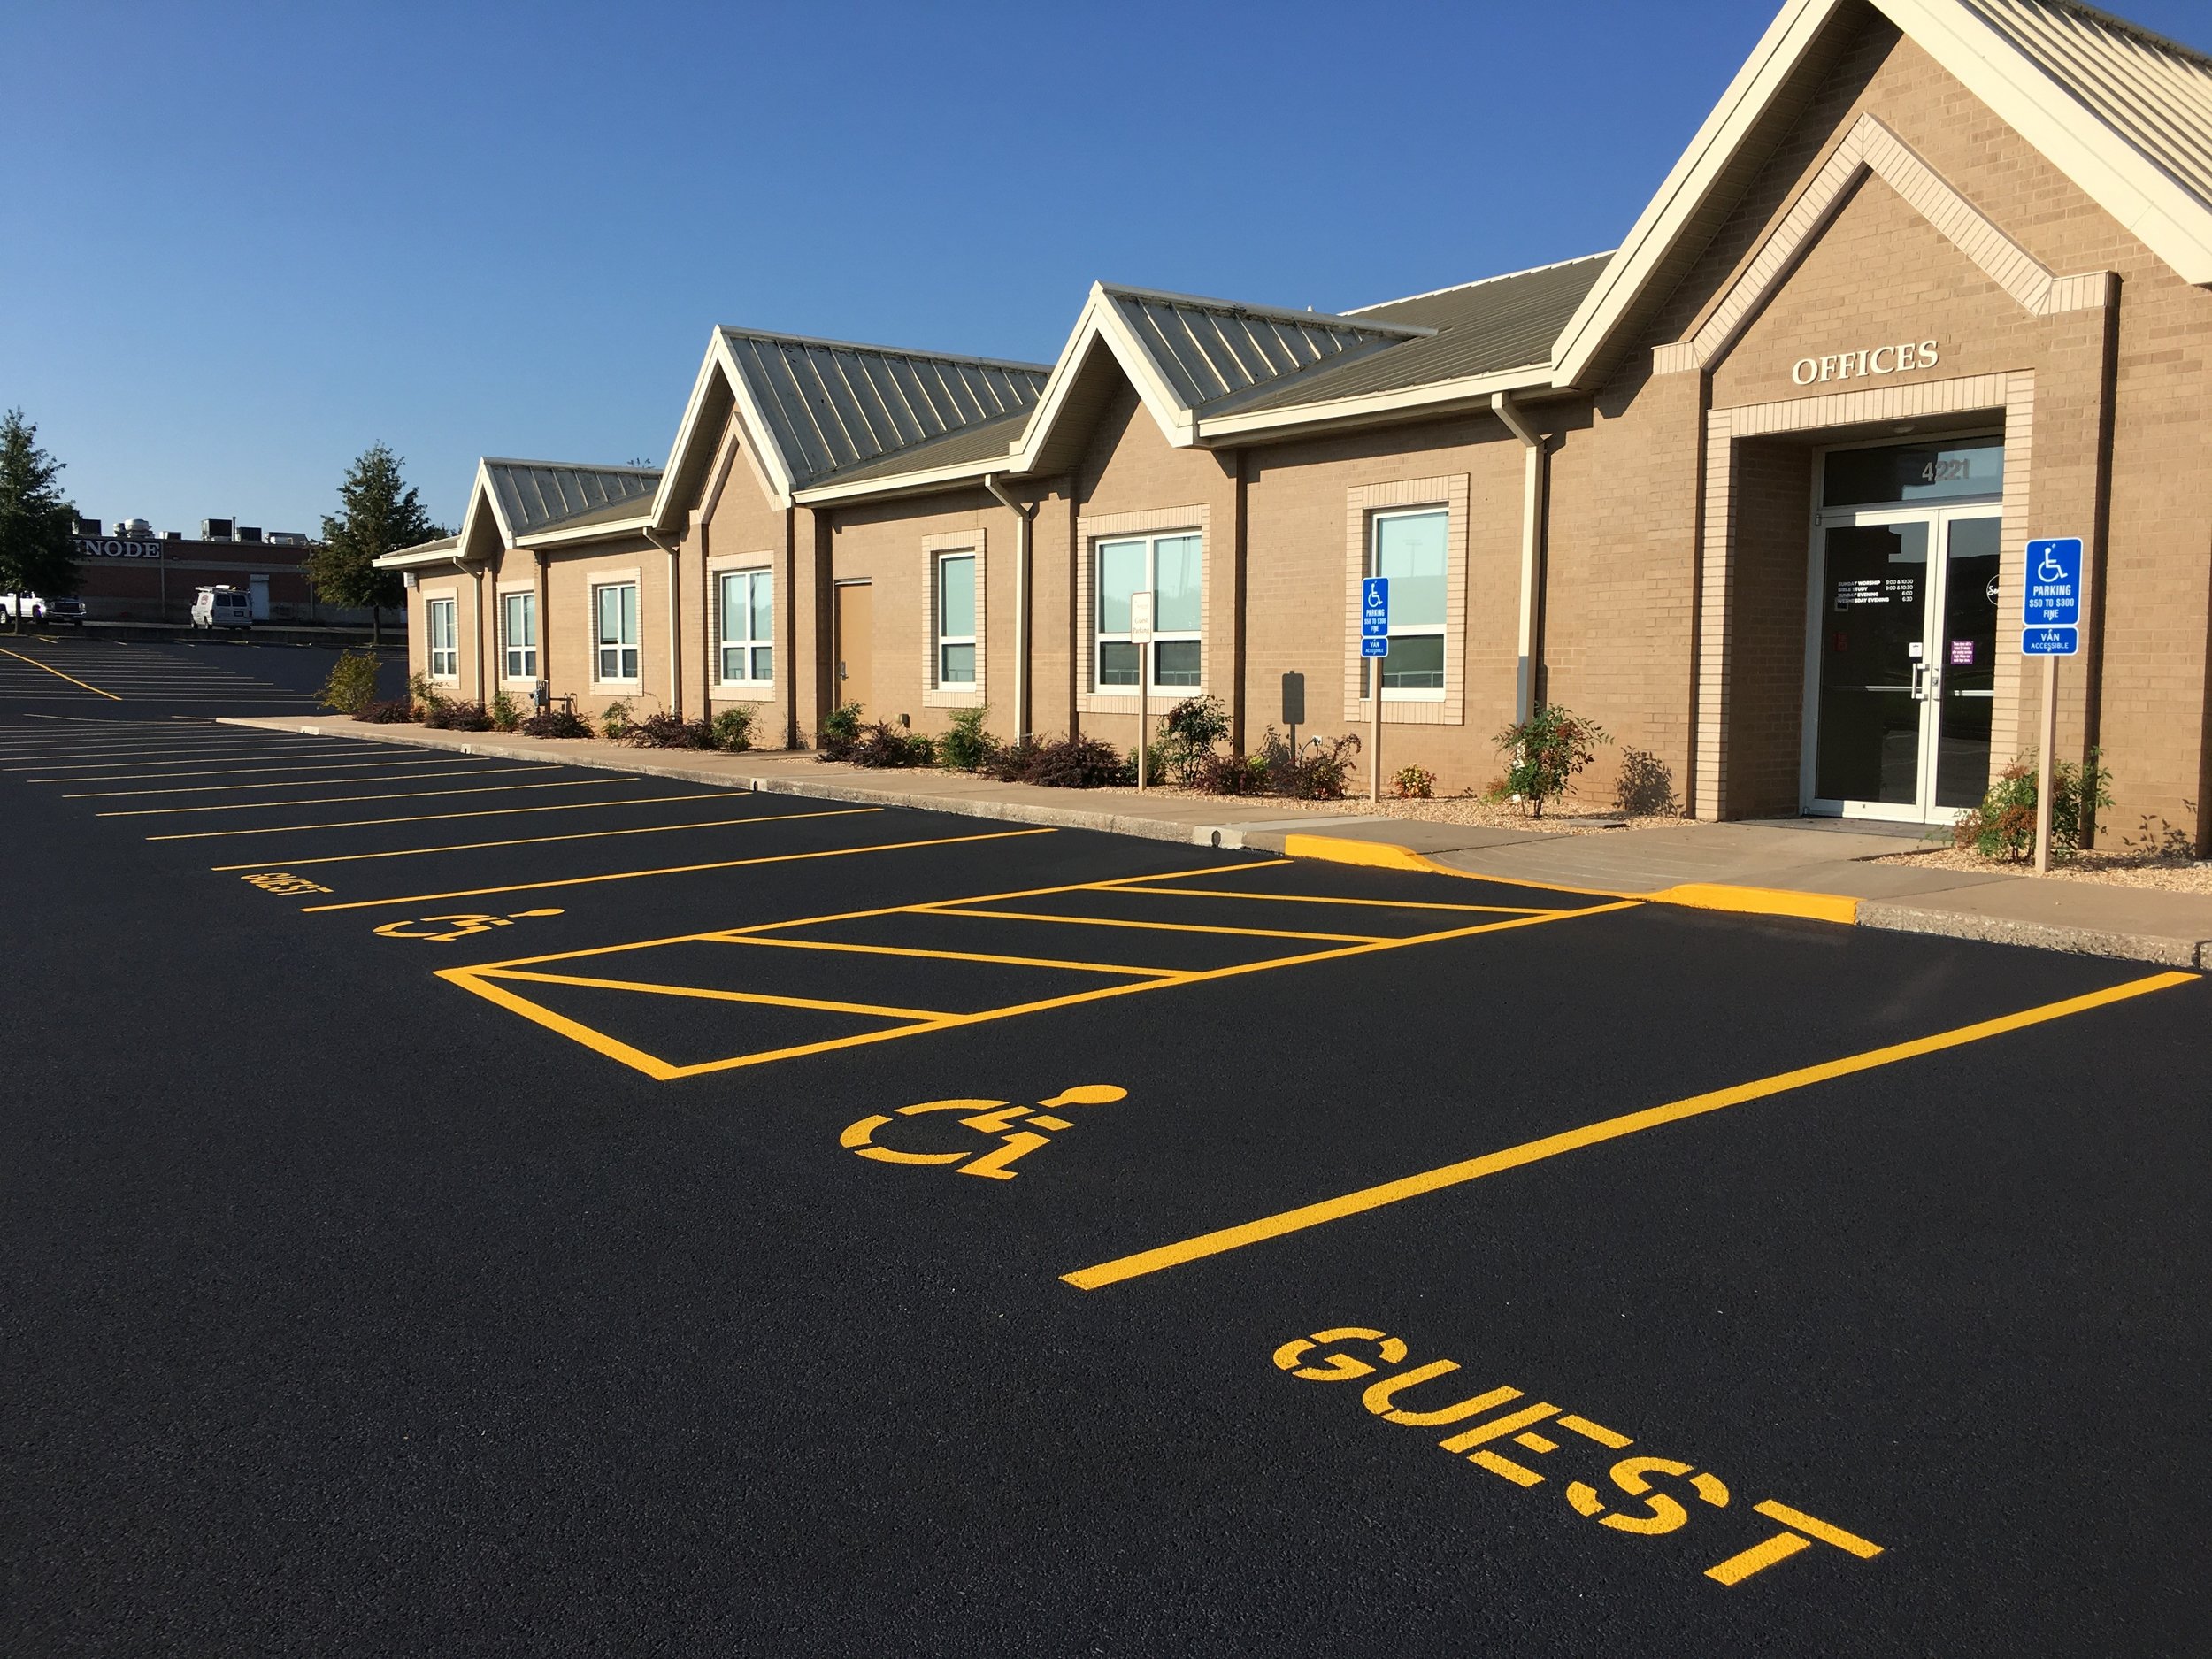 Fresh asphalt sealcoating on a large commercial parking lot, enhancing the durability and appearance of the surface, a project by Springfield Striping and Sealing near Springfield, Missouri.